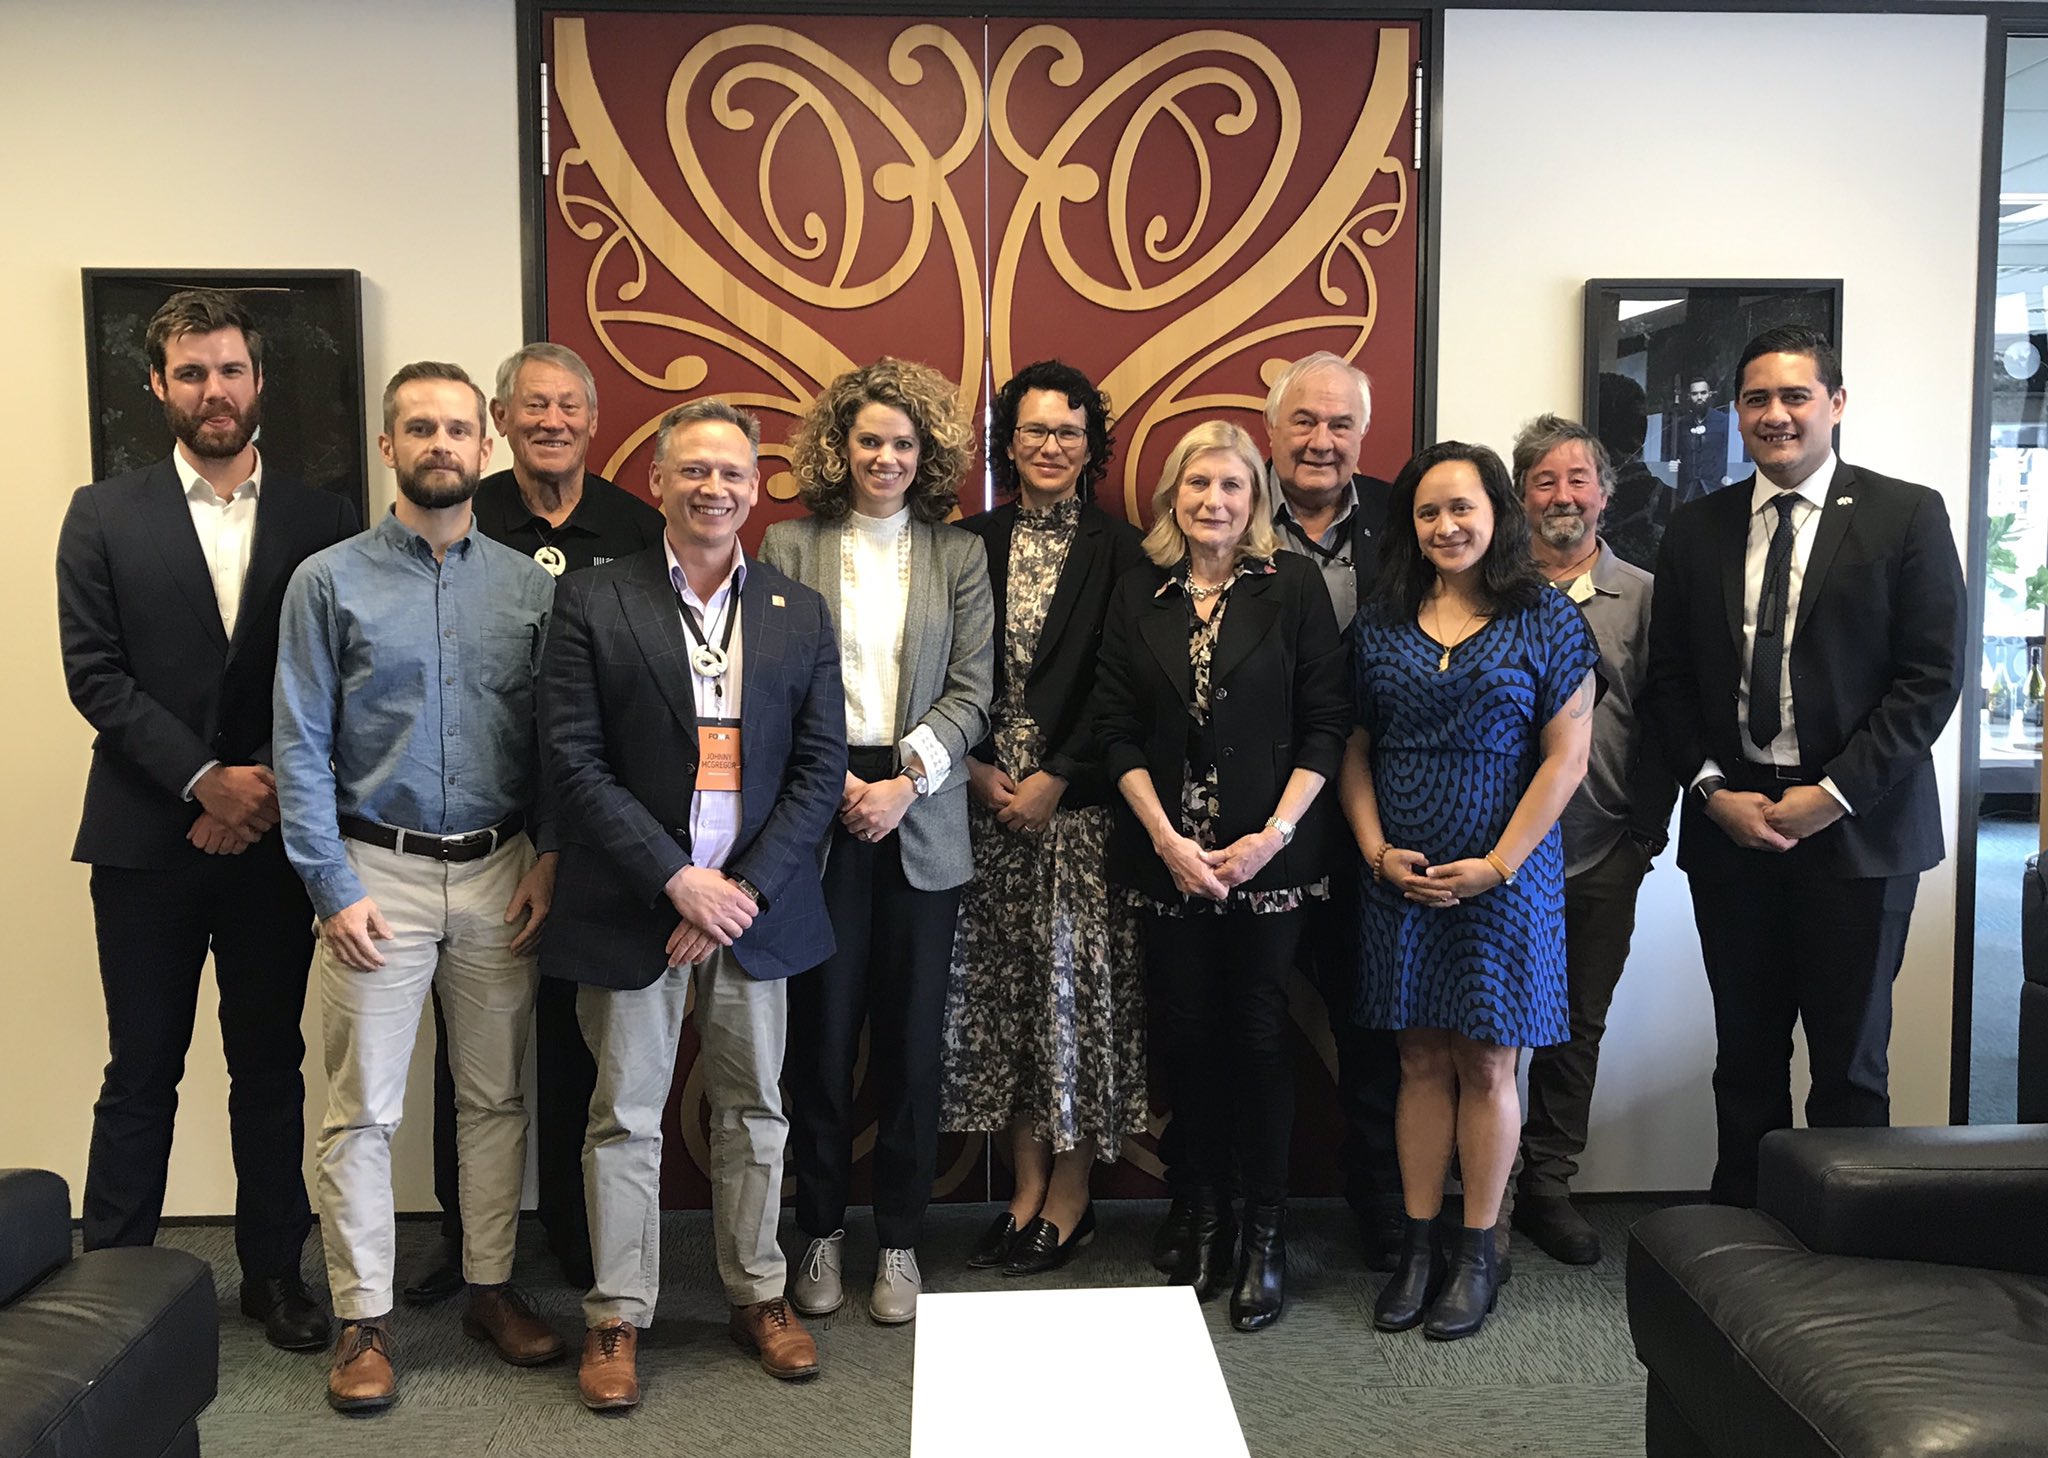 New Zealand British High Commission staff with board members of Māori mana whenua (authority of the land) enterprise, Wakatū Incorporation.